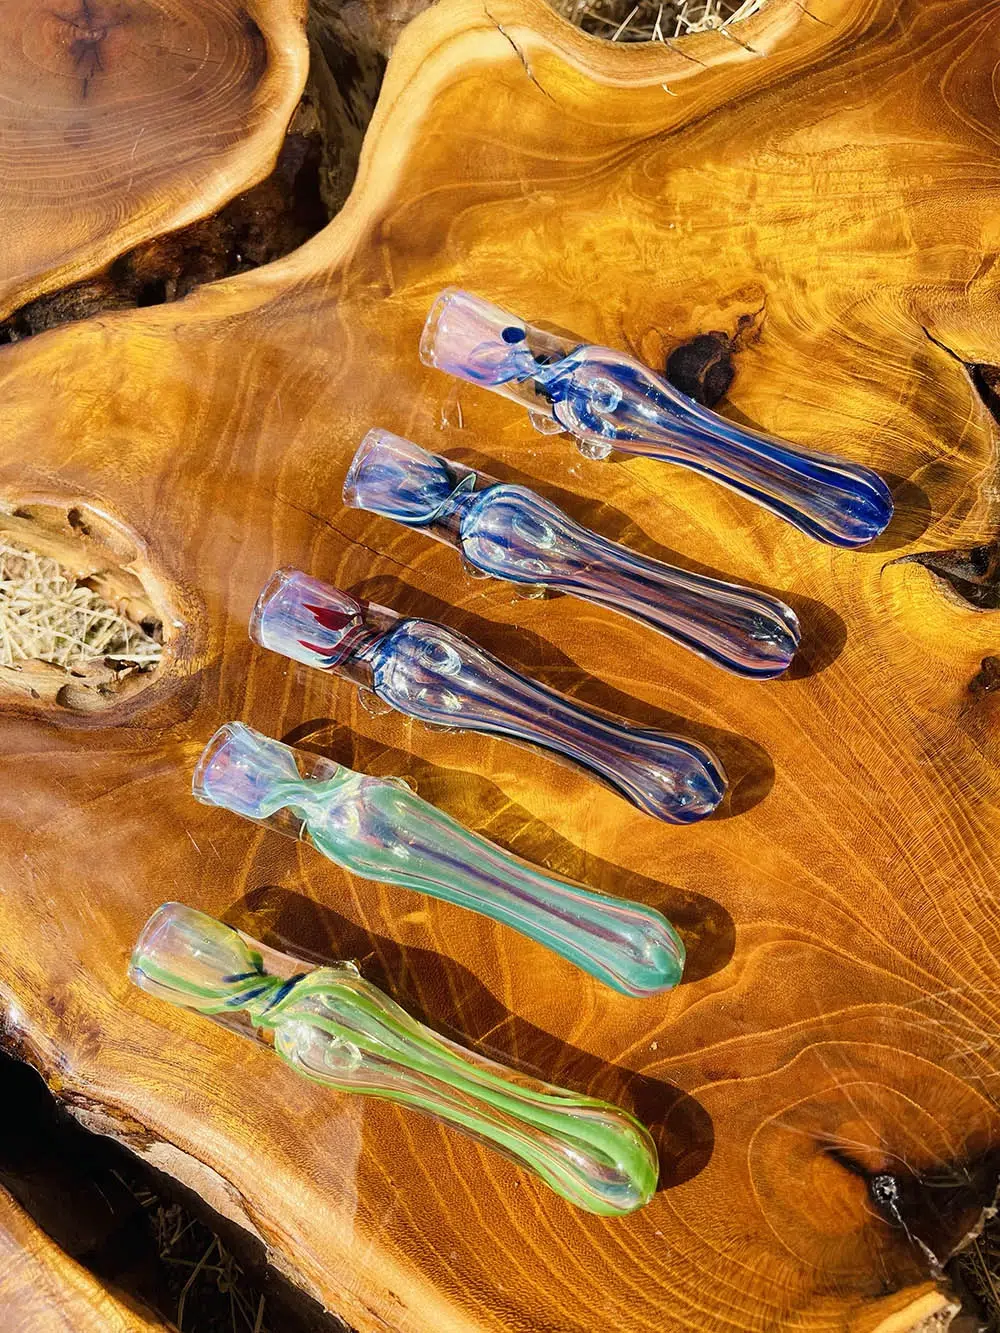 five chillum pipes with swirl pattern displayed on wooden table